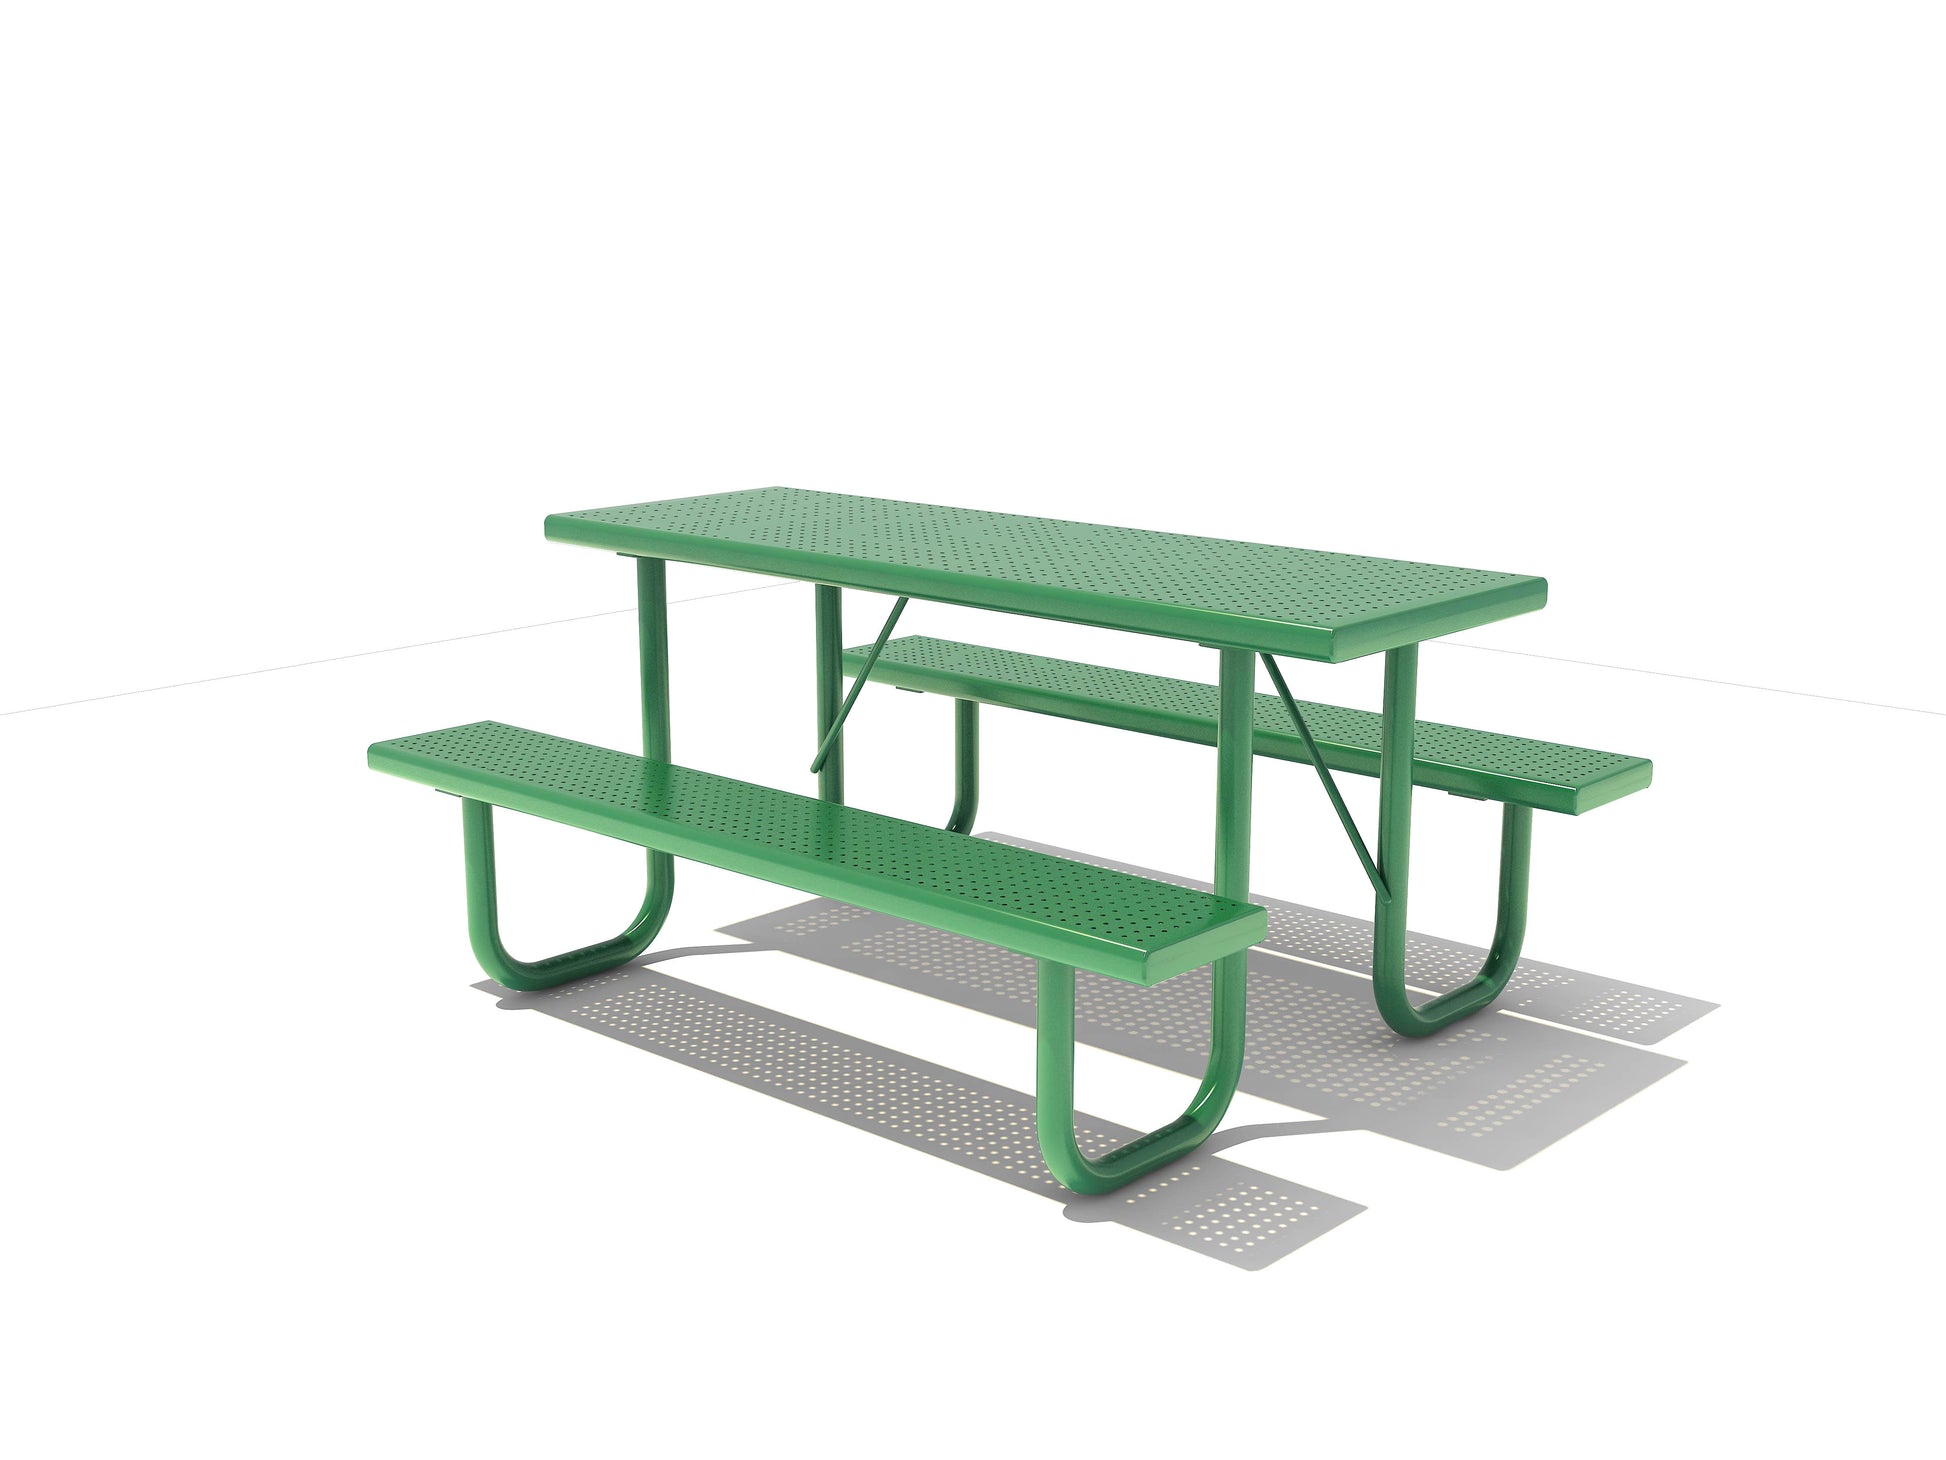 6' Picnic Table with Bench Seats - Perforated Default Title